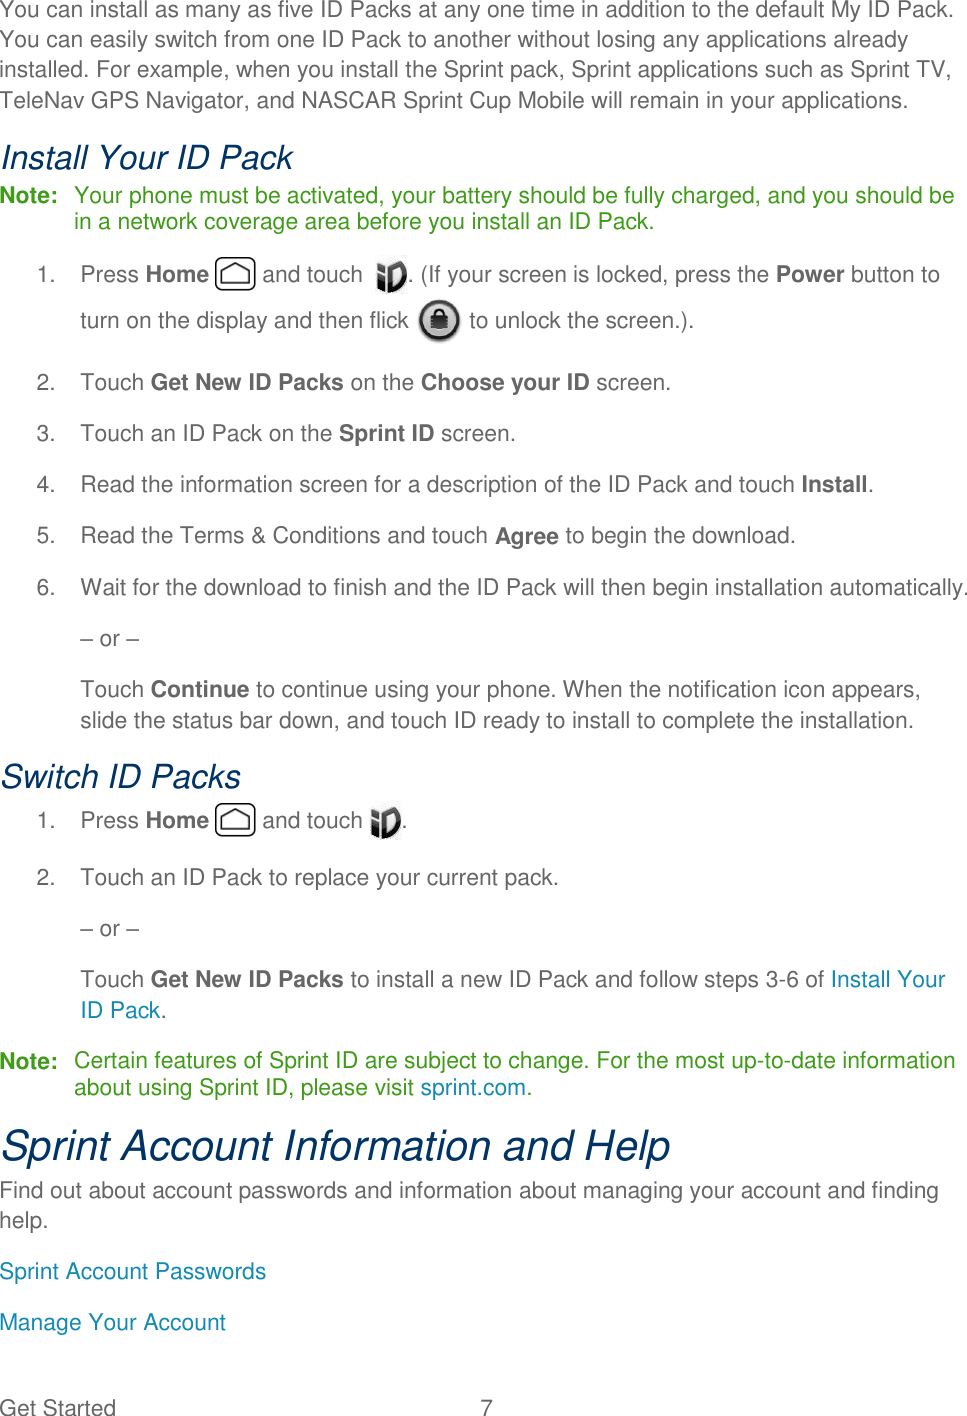 Get Started  7 You can install as many as five ID Packs at any one time in addition to the default My ID Pack. You can easily switch from one ID Pack to another without losing any applications already installed. For example, when you install the Sprint pack, Sprint applications such as Sprint TV, TeleNav GPS Navigator, and NASCAR Sprint Cup Mobile will remain in your applications. Install Your ID Pack Note:  Your phone must be activated, your battery should be fully charged, and you should be in a network coverage area before you install an ID Pack. 1.  Press Home   and touch   . (If your screen is locked, press the Power button to turn on the display and then flick   to unlock the screen.). 2.  Touch Get New ID Packs on the Choose your ID screen. 3.  Touch an ID Pack on the Sprint ID screen. 4.  Read the information screen for a description of the ID Pack and touch Install. 5.  Read the Terms &amp; Conditions and touch Agree to begin the download. 6.  Wait for the download to finish and the ID Pack will then begin installation automatically. – or – Touch Continue to continue using your phone. When the notification icon appears, slide the status bar down, and touch ID ready to install to complete the installation. Switch ID Packs 1.  Press Home   and touch  .  2.  Touch an ID Pack to replace your current pack. – or – Touch Get New ID Packs to install a new ID Pack and follow steps 3-6 of Install Your ID Pack. Note:  Certain features of Sprint ID are subject to change. For the most up-to-date information about using Sprint ID, please visit sprint.com. Sprint Account Information and Help Find out about account passwords and information about managing your account and finding help. Sprint Account Passwords Manage Your Account 